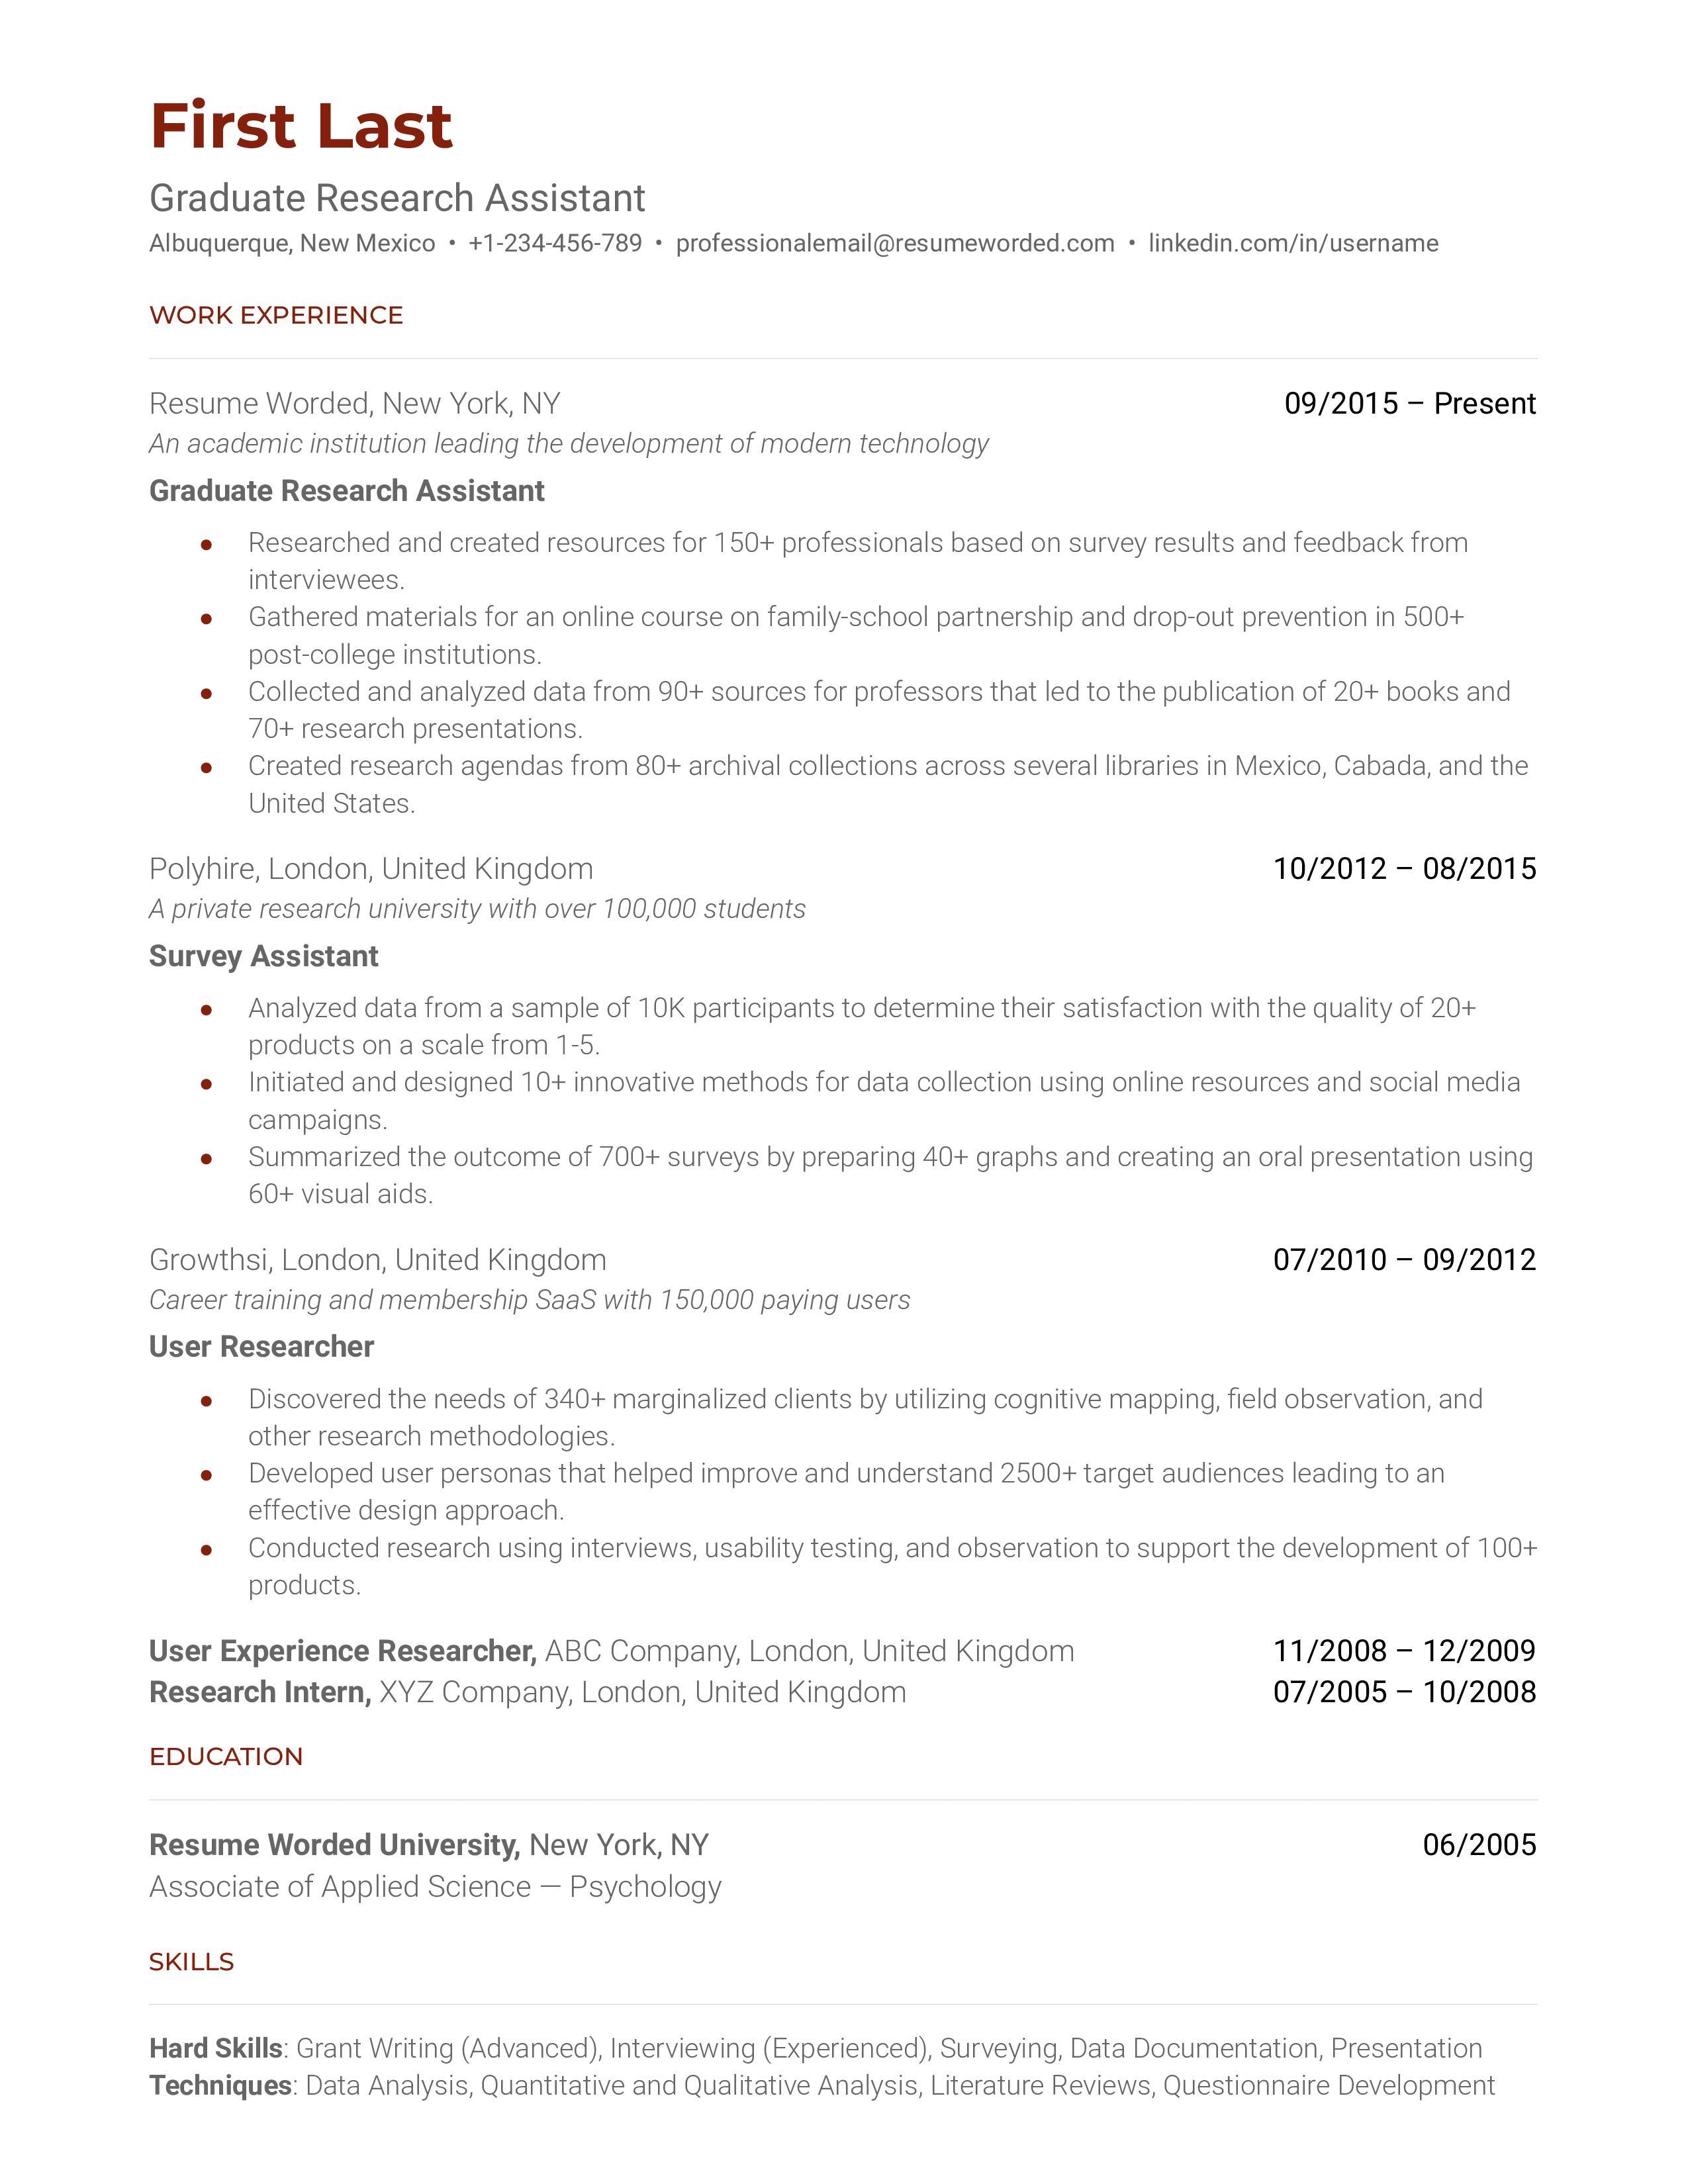 A resume for a graduate research assistant with a degree in biology and experience as a research assistant.